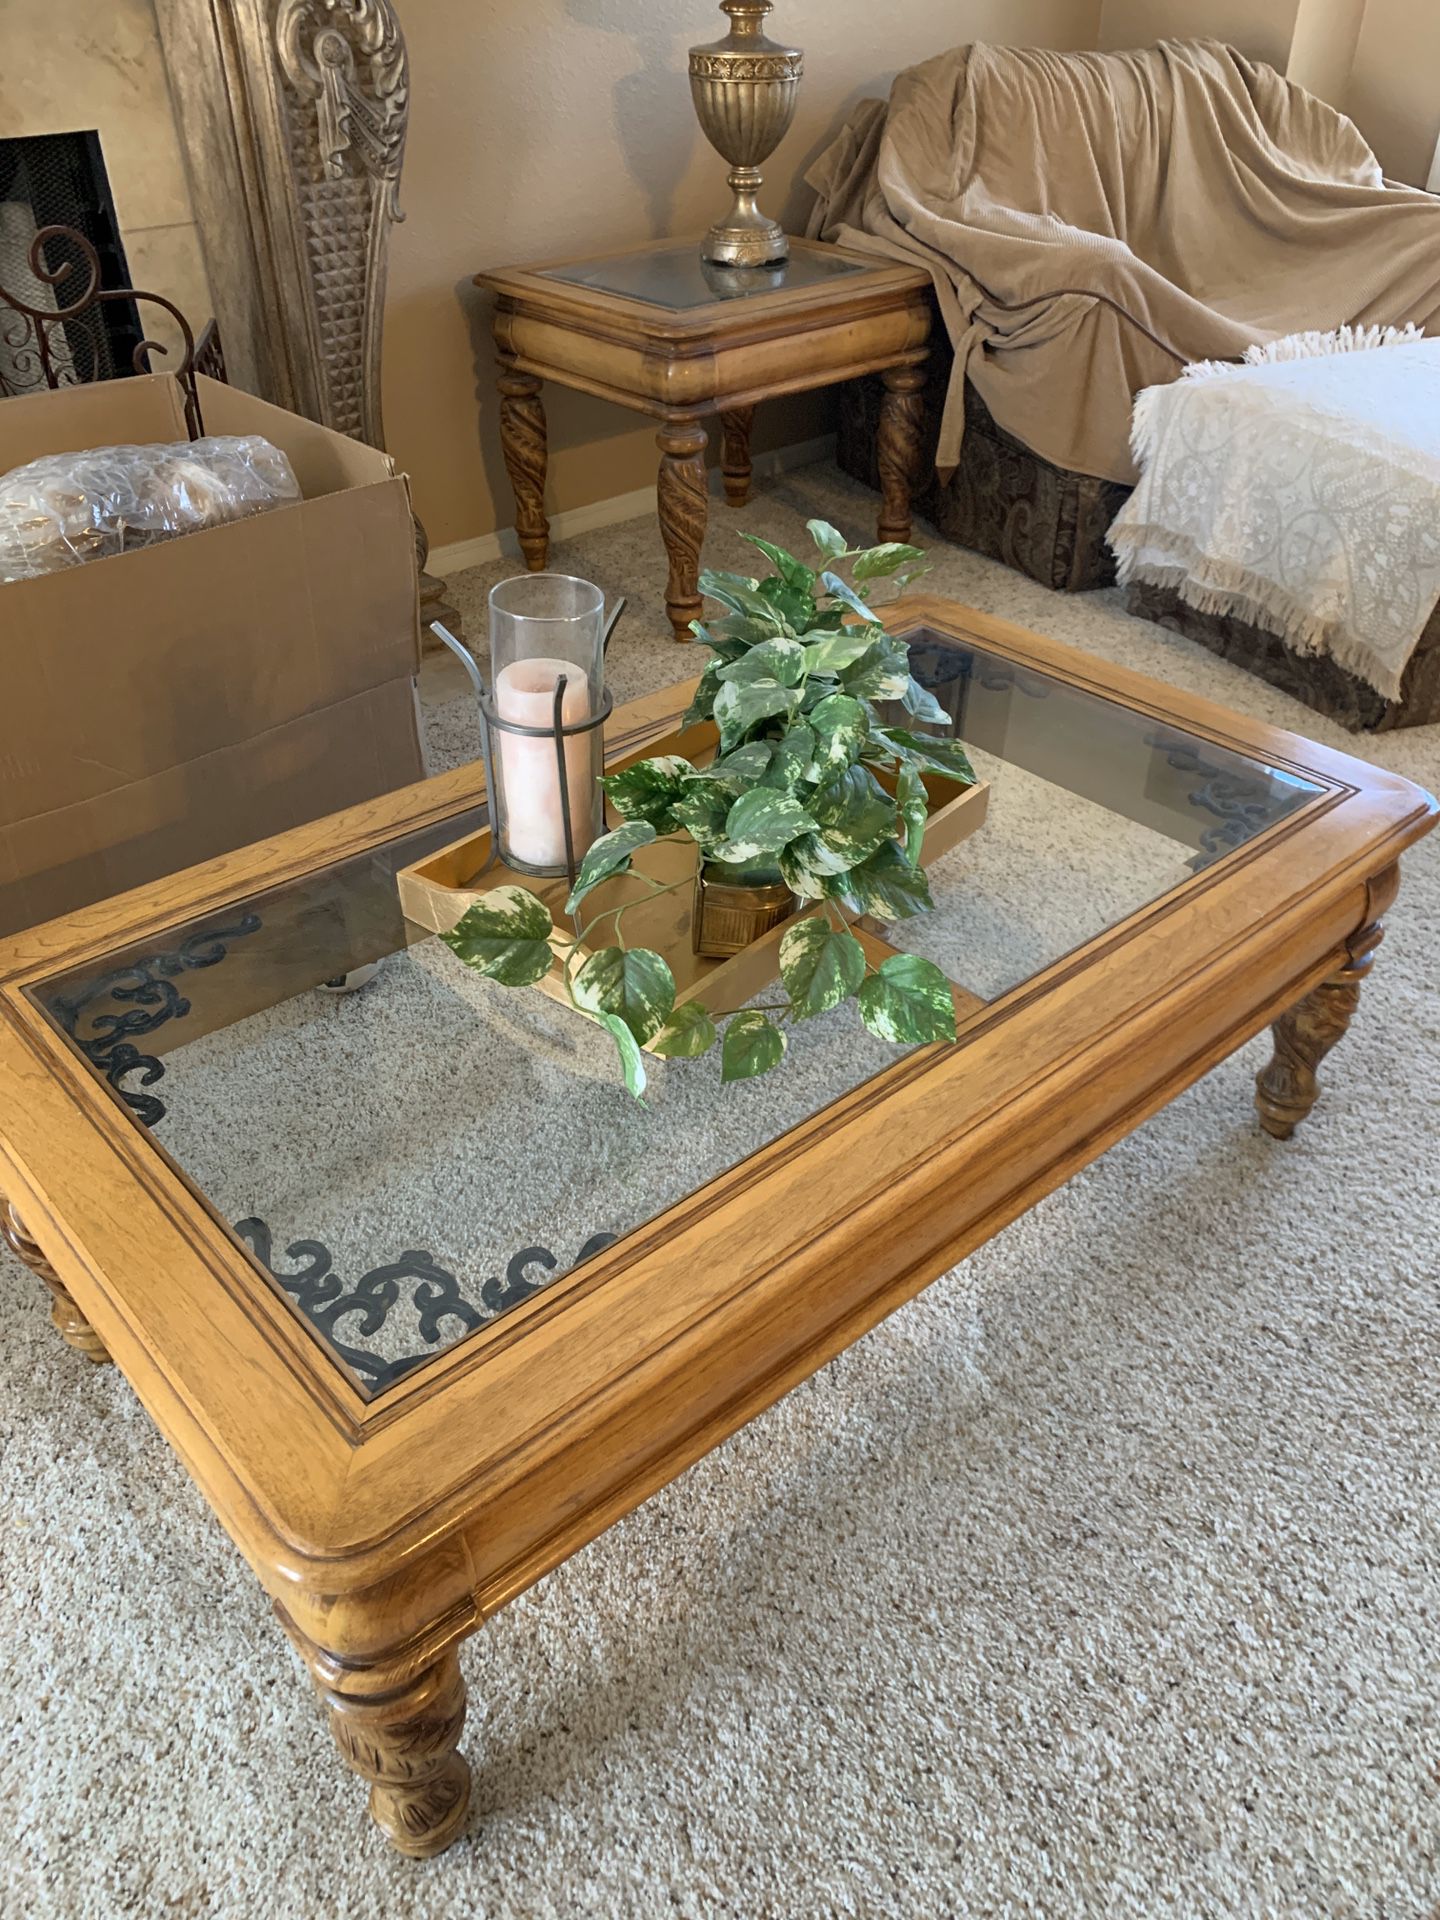 3 piece table set (end, coffee, and sofa)